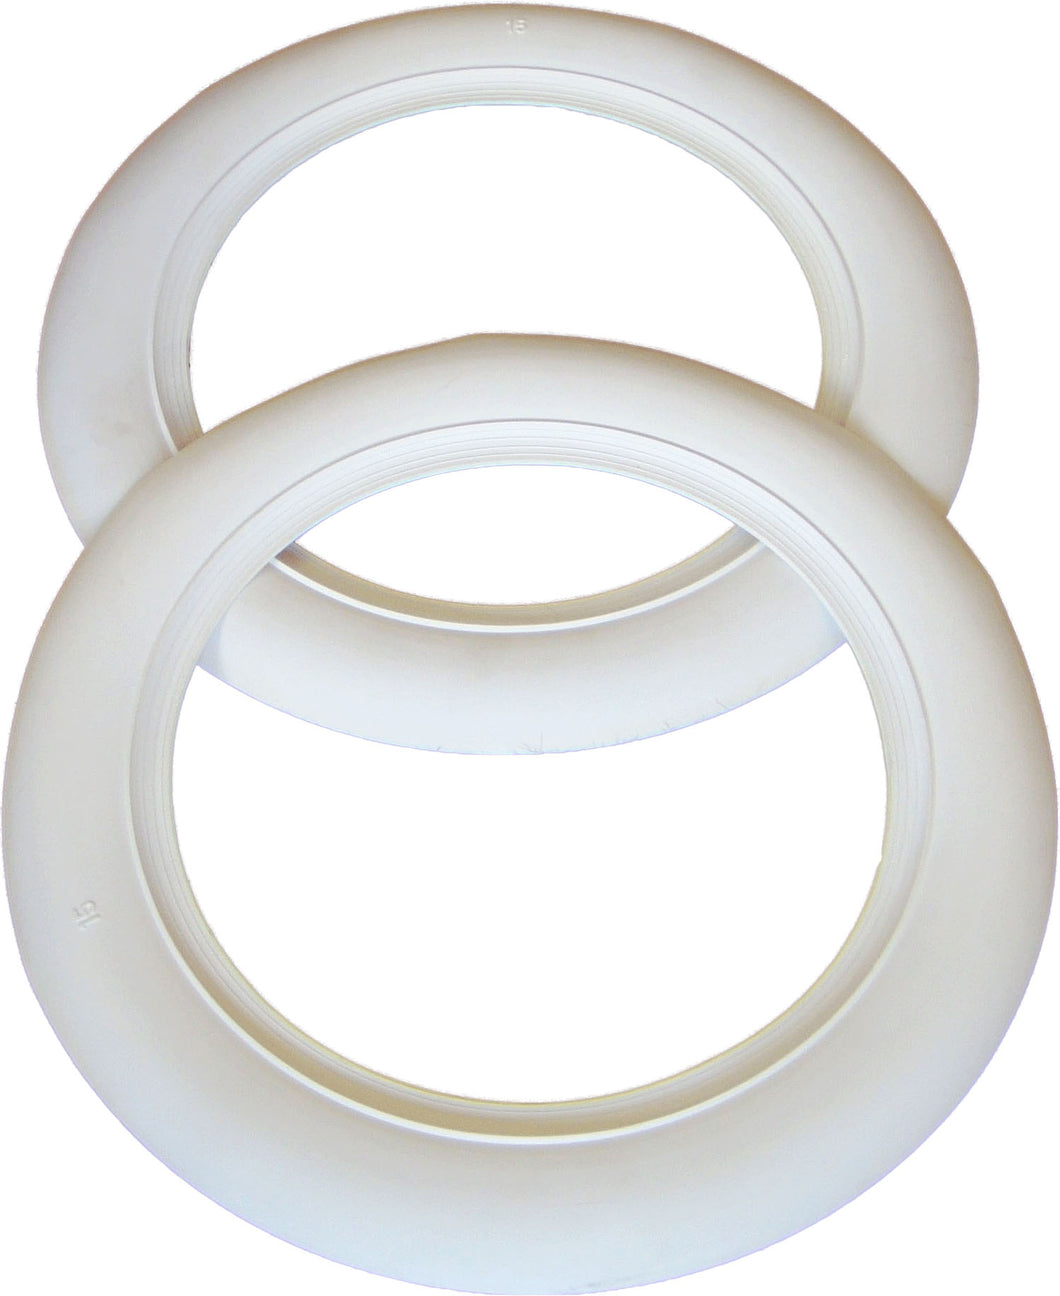 2 x 15'' Atlas Whitewall Inserts (set of 2) - 1 1/2'' (45mm) wide